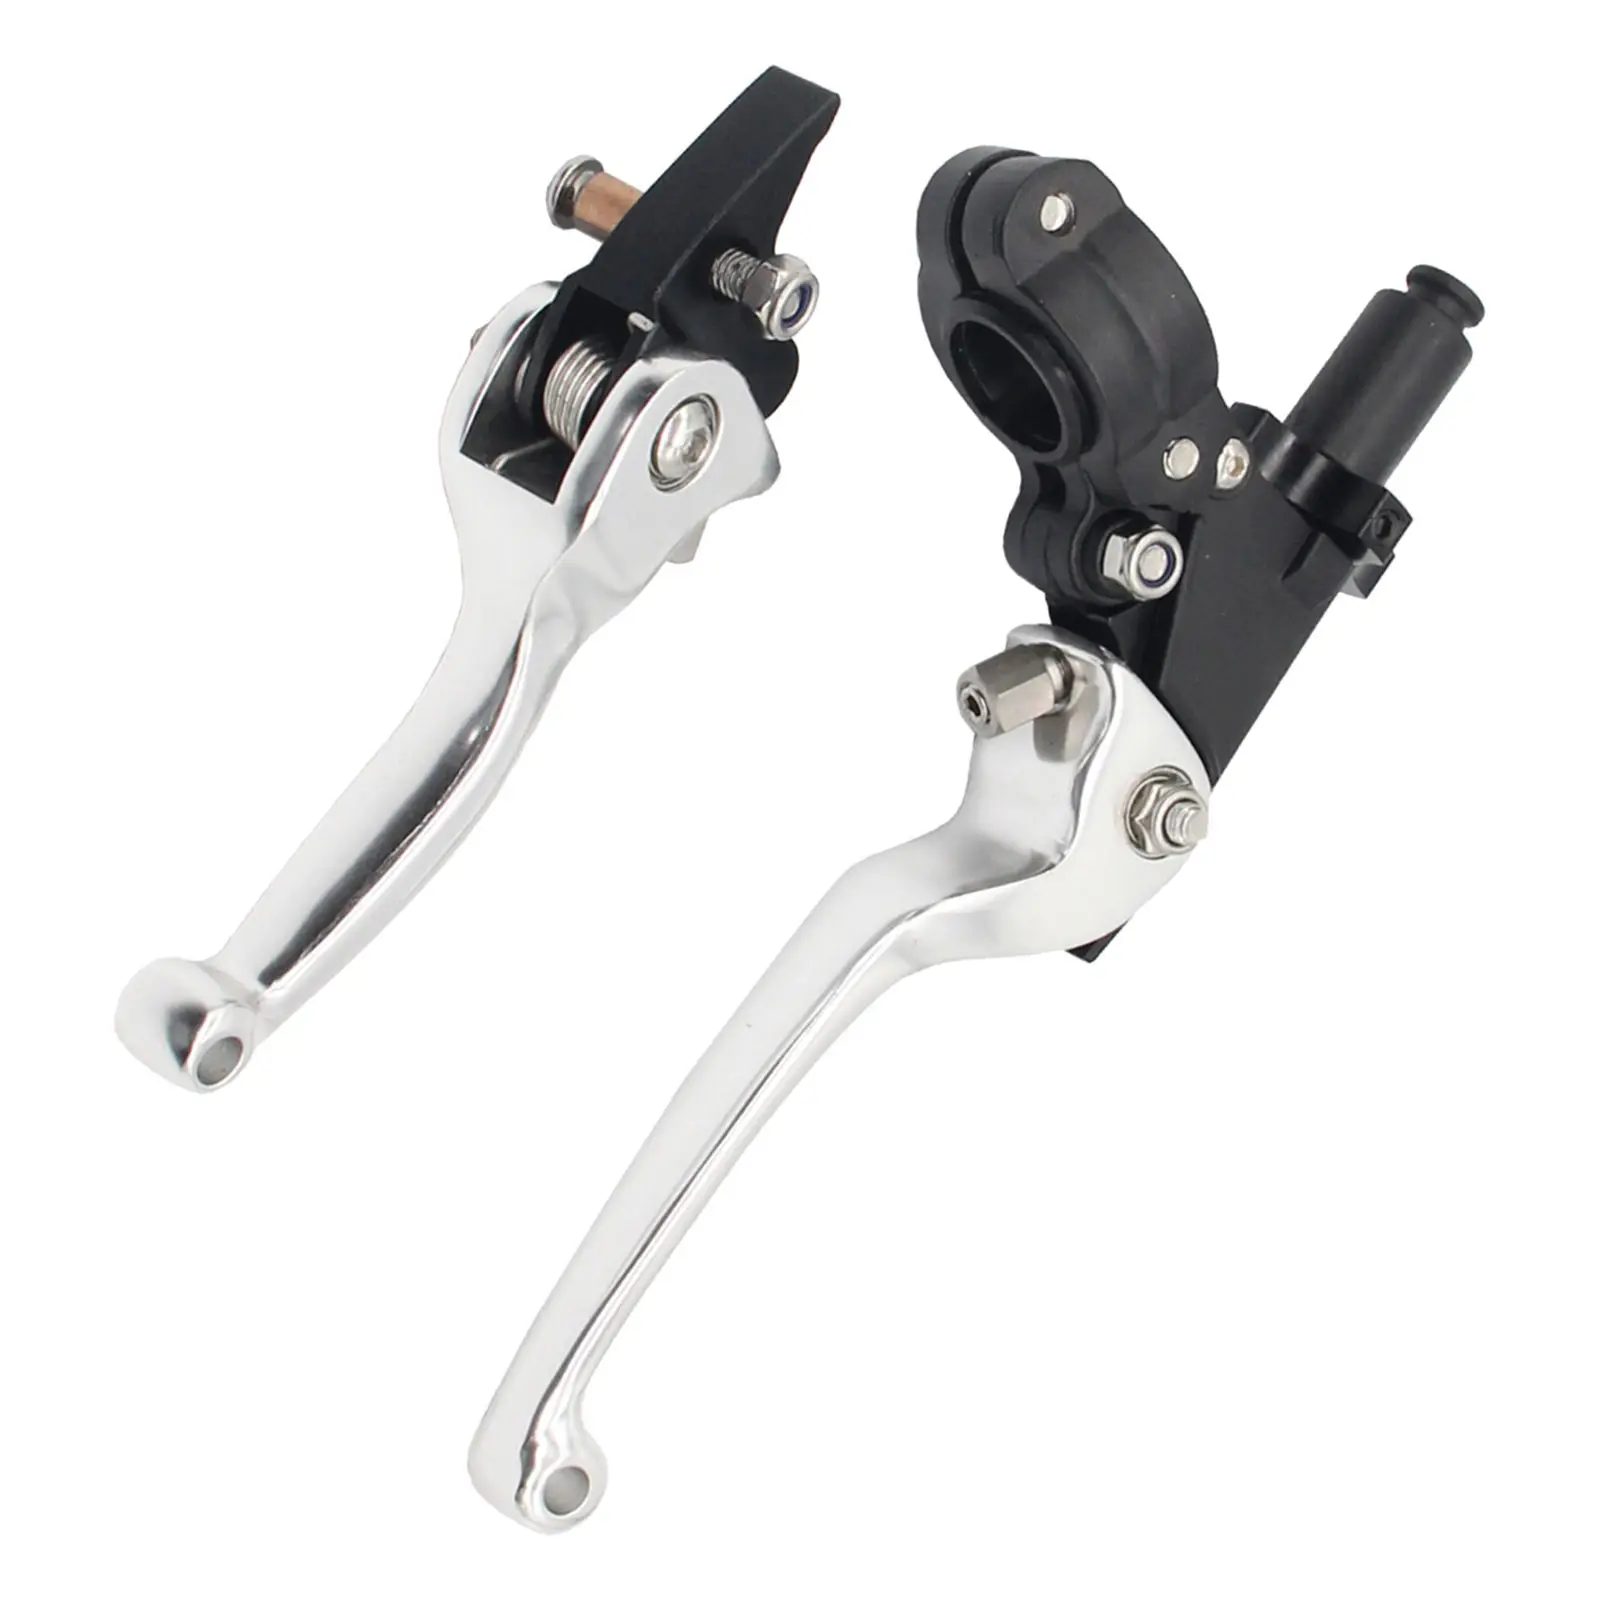 Clutch Brake Lever Left & Right Set Front Folding Universal Fits for 22mm 7/8 inch Handlebar Spare Parts 110Cc 125Cc 140Cc